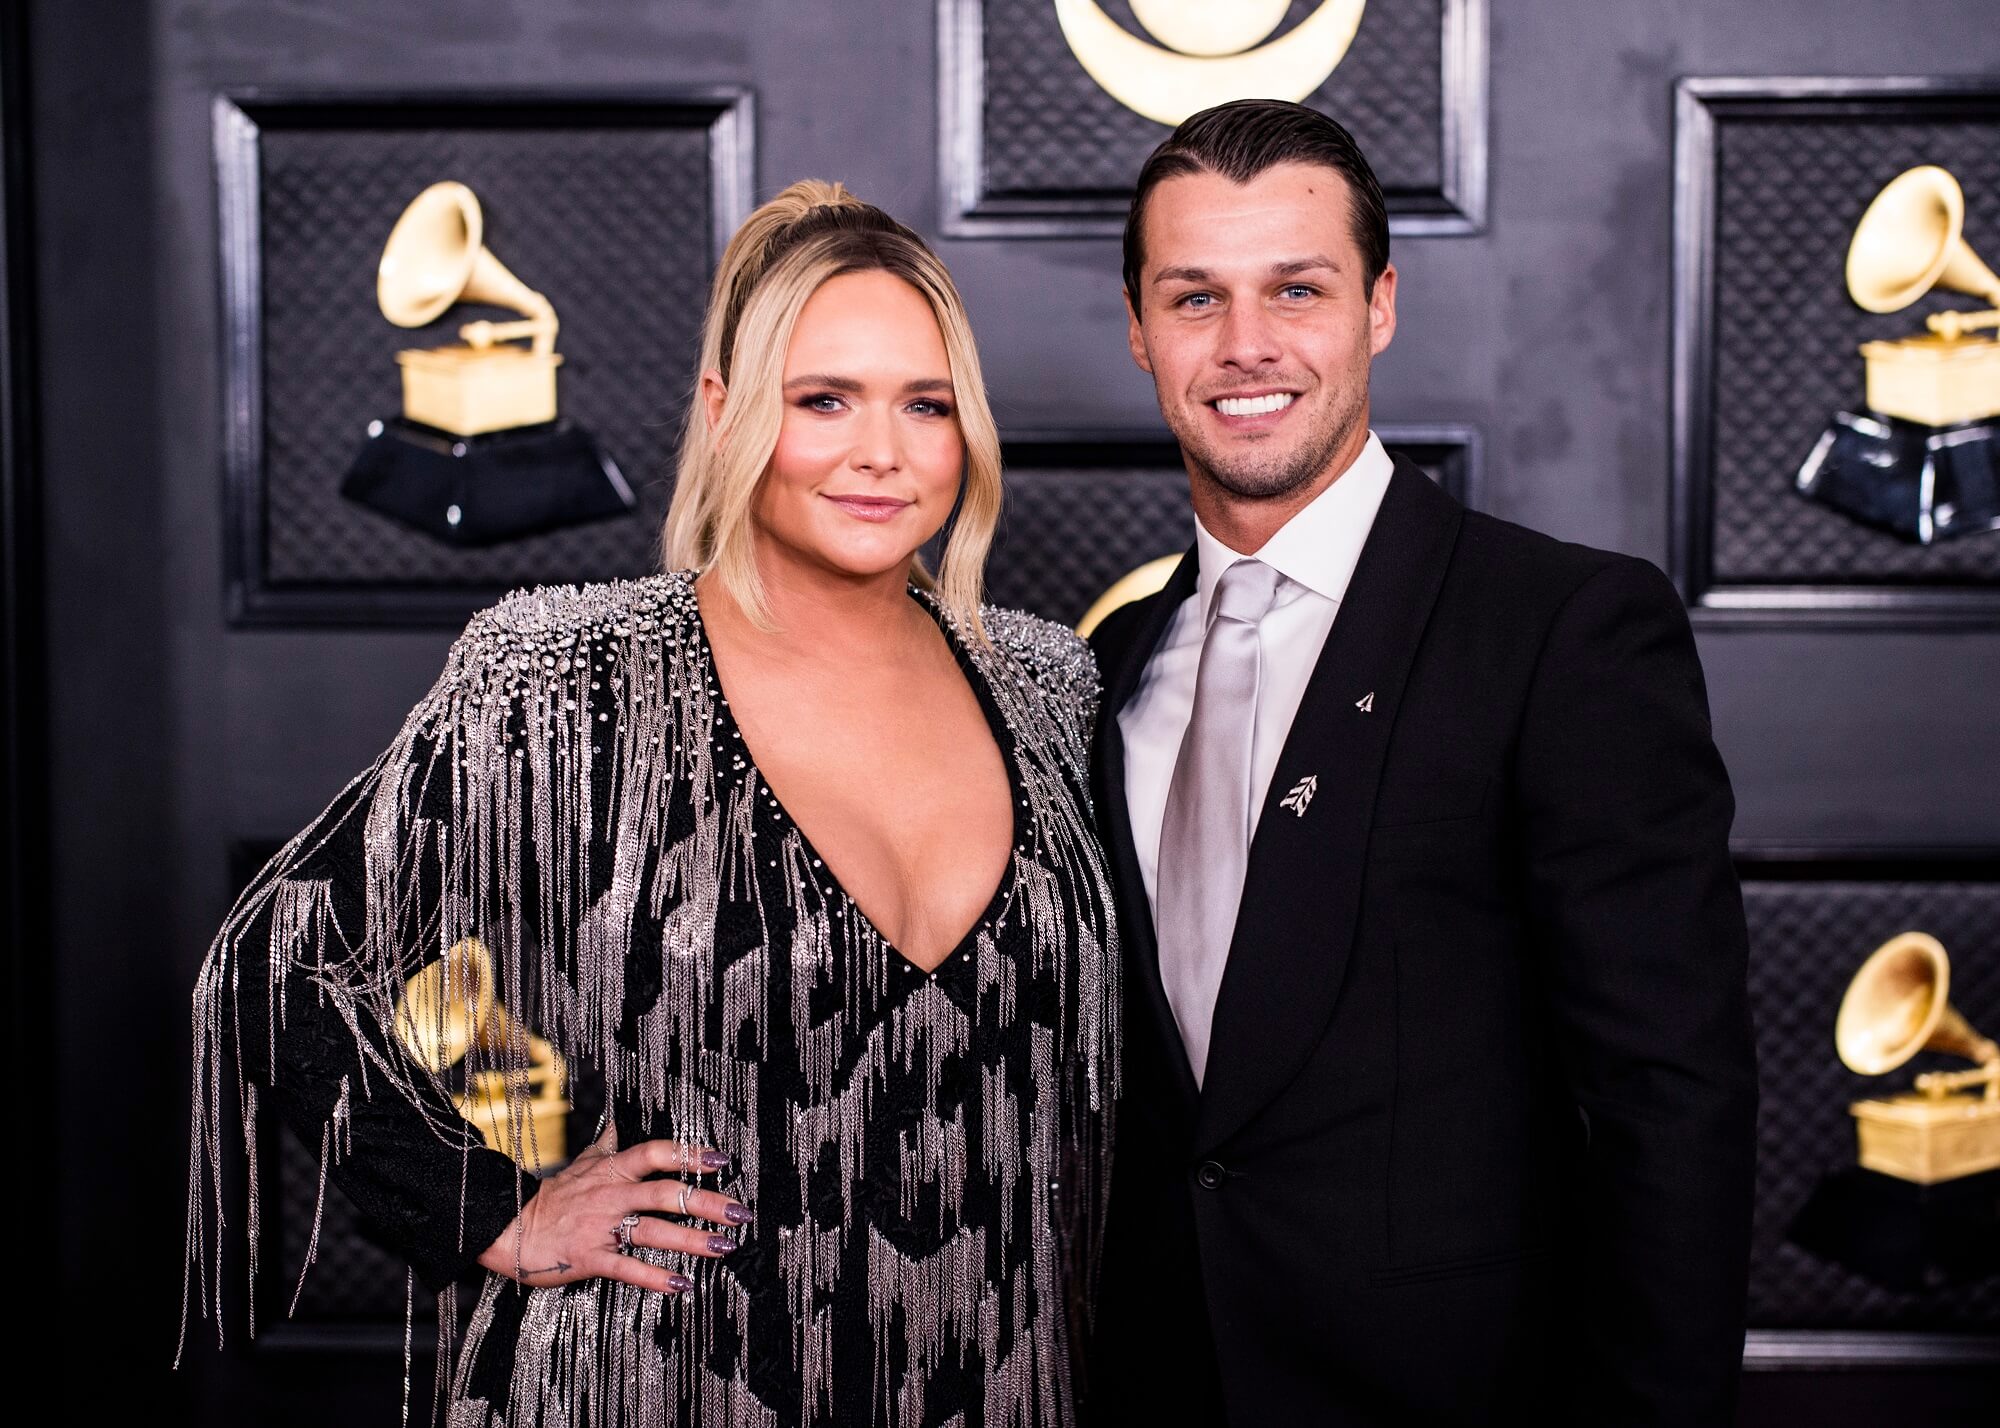 Miranda Lambert and Brendan McLoughlin smile together in front of a black backdrop with gold Grammy trophies on it